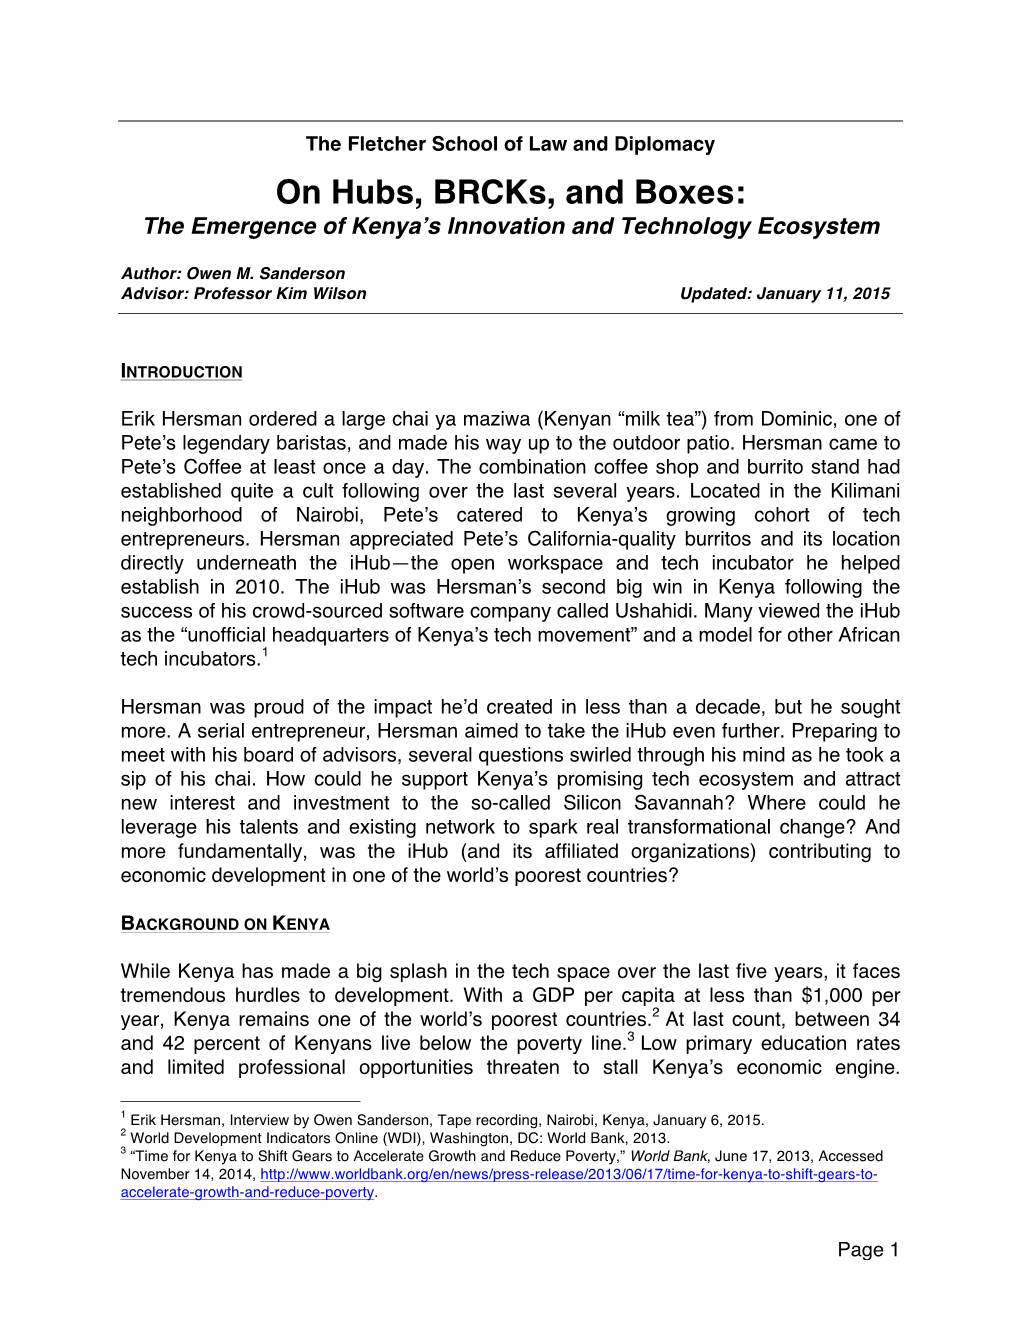 On Hubs, Brcks, and Boxes: the Emergence of Kenya’S Innovation and Technology Ecosystem